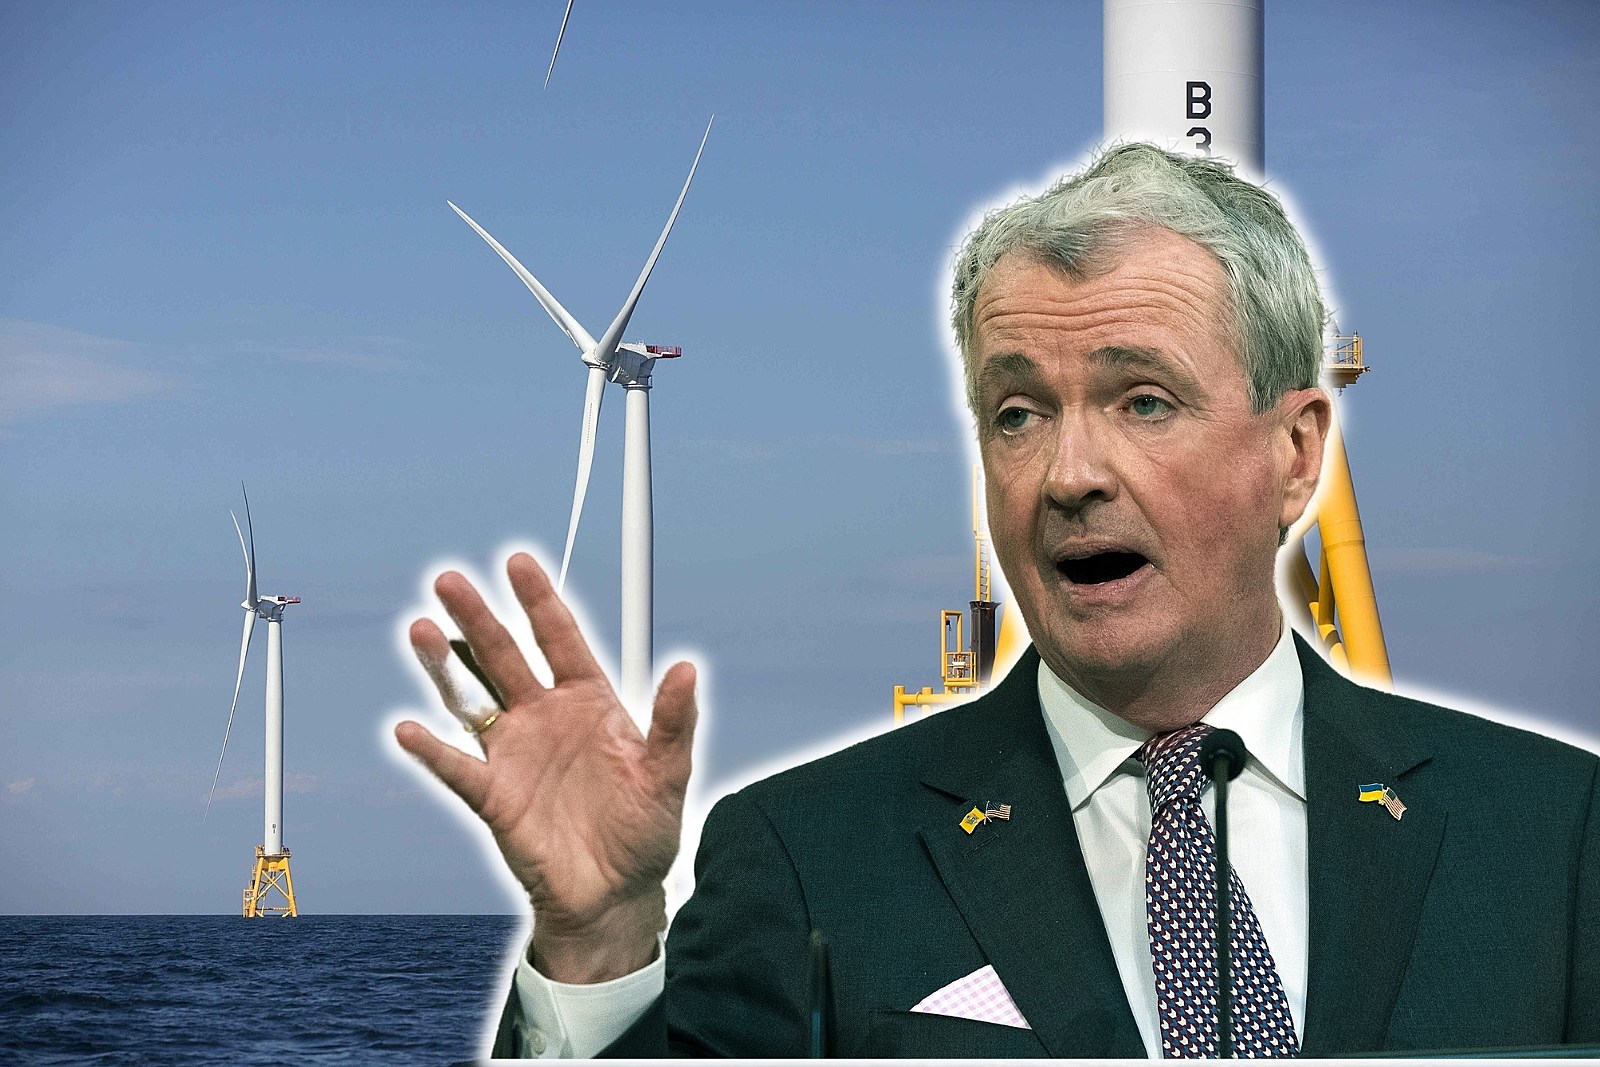 Fact check: Is Gov. Murphy making money on offshore wind farms?